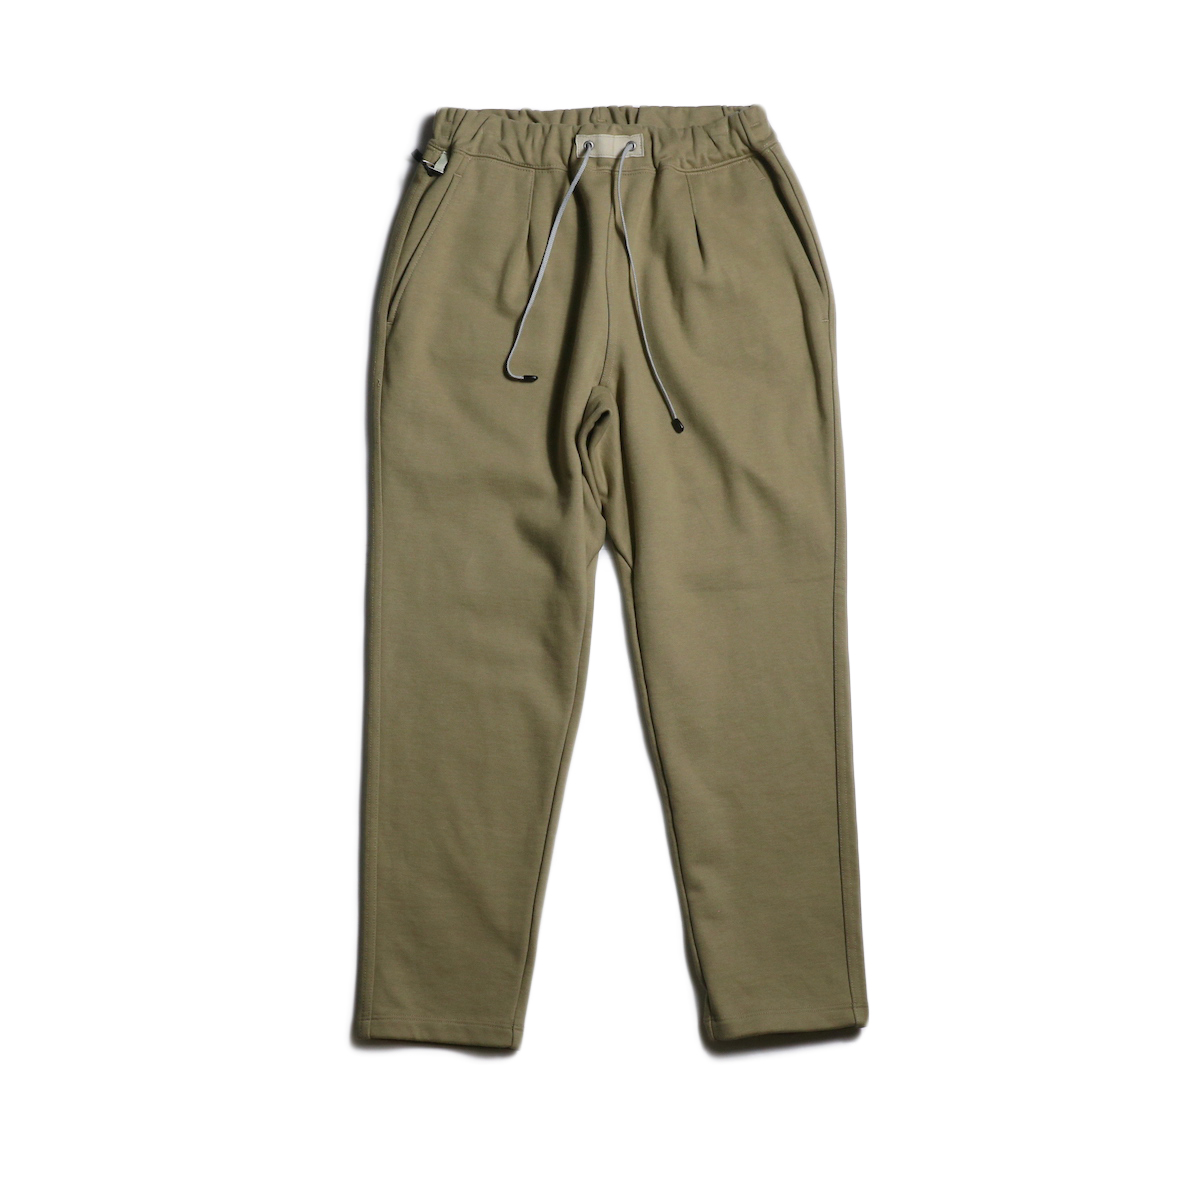 CURLY / BROMLEY EZ TROUSERS (Beige)